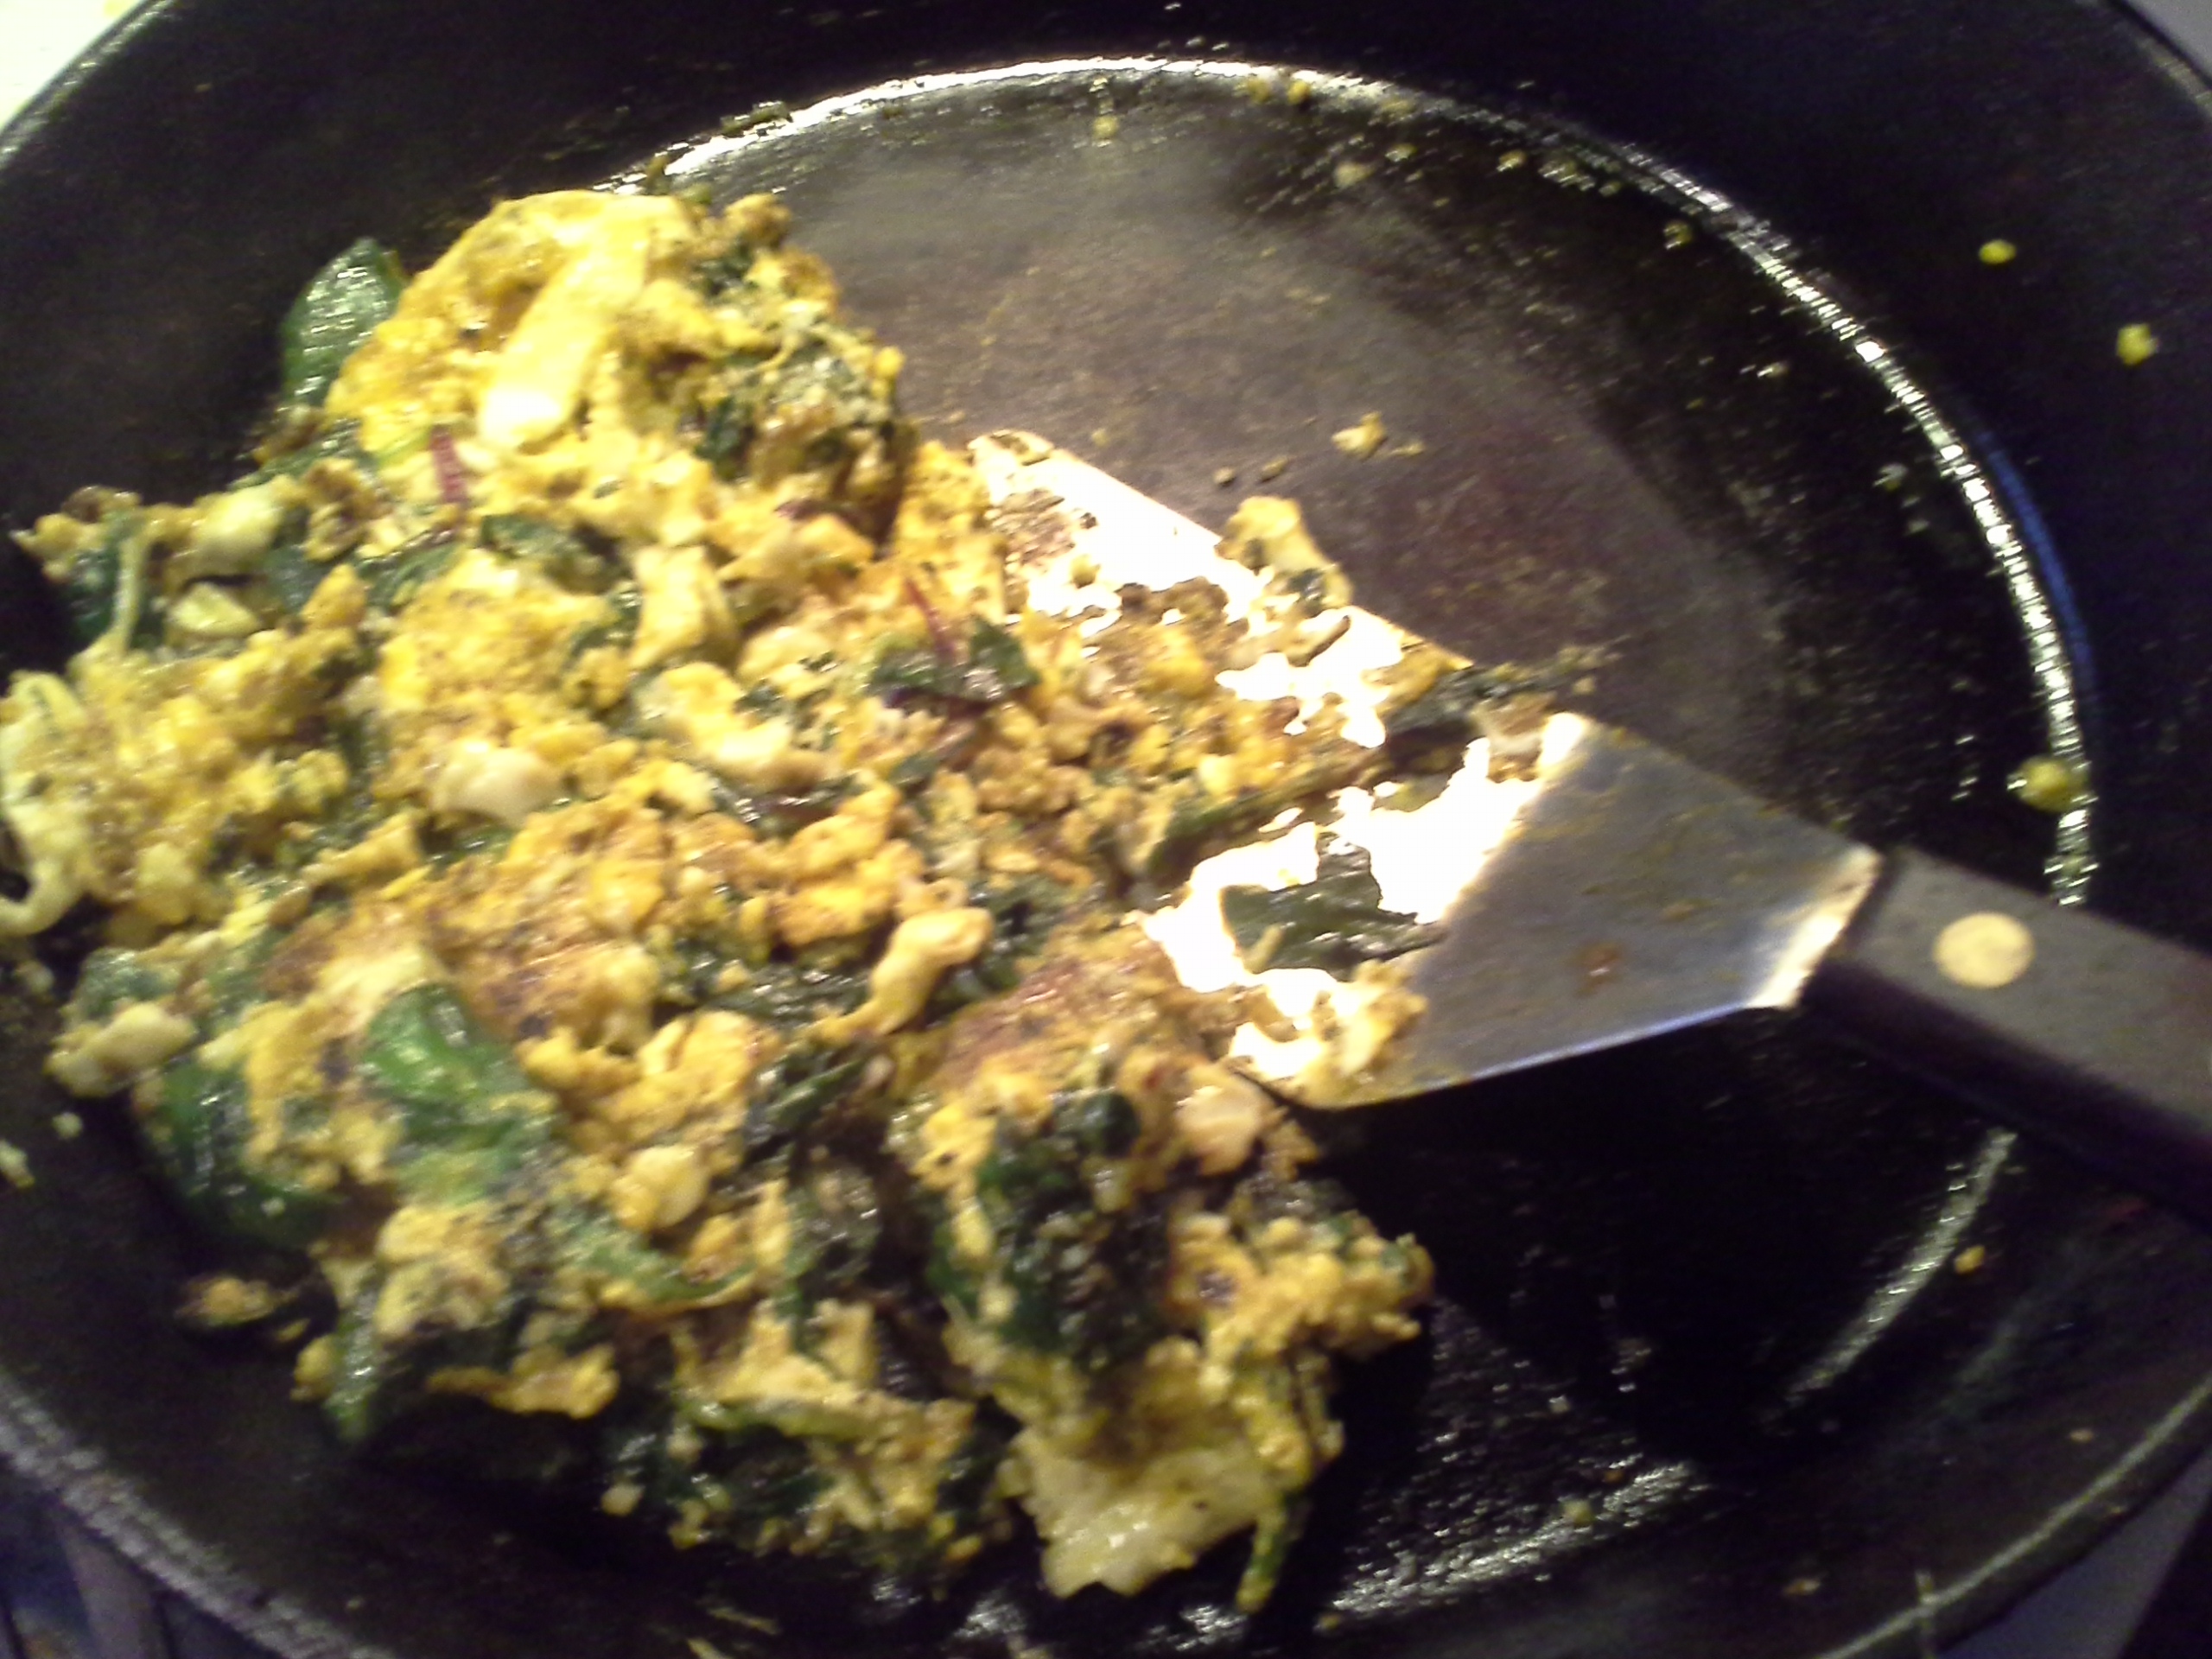 Breakfast: 9:05 a.m. | 4 eggs, 2 oz. baby kale/chard/spinach mix, 2 Tbsp. red palm oil, herbs & spices